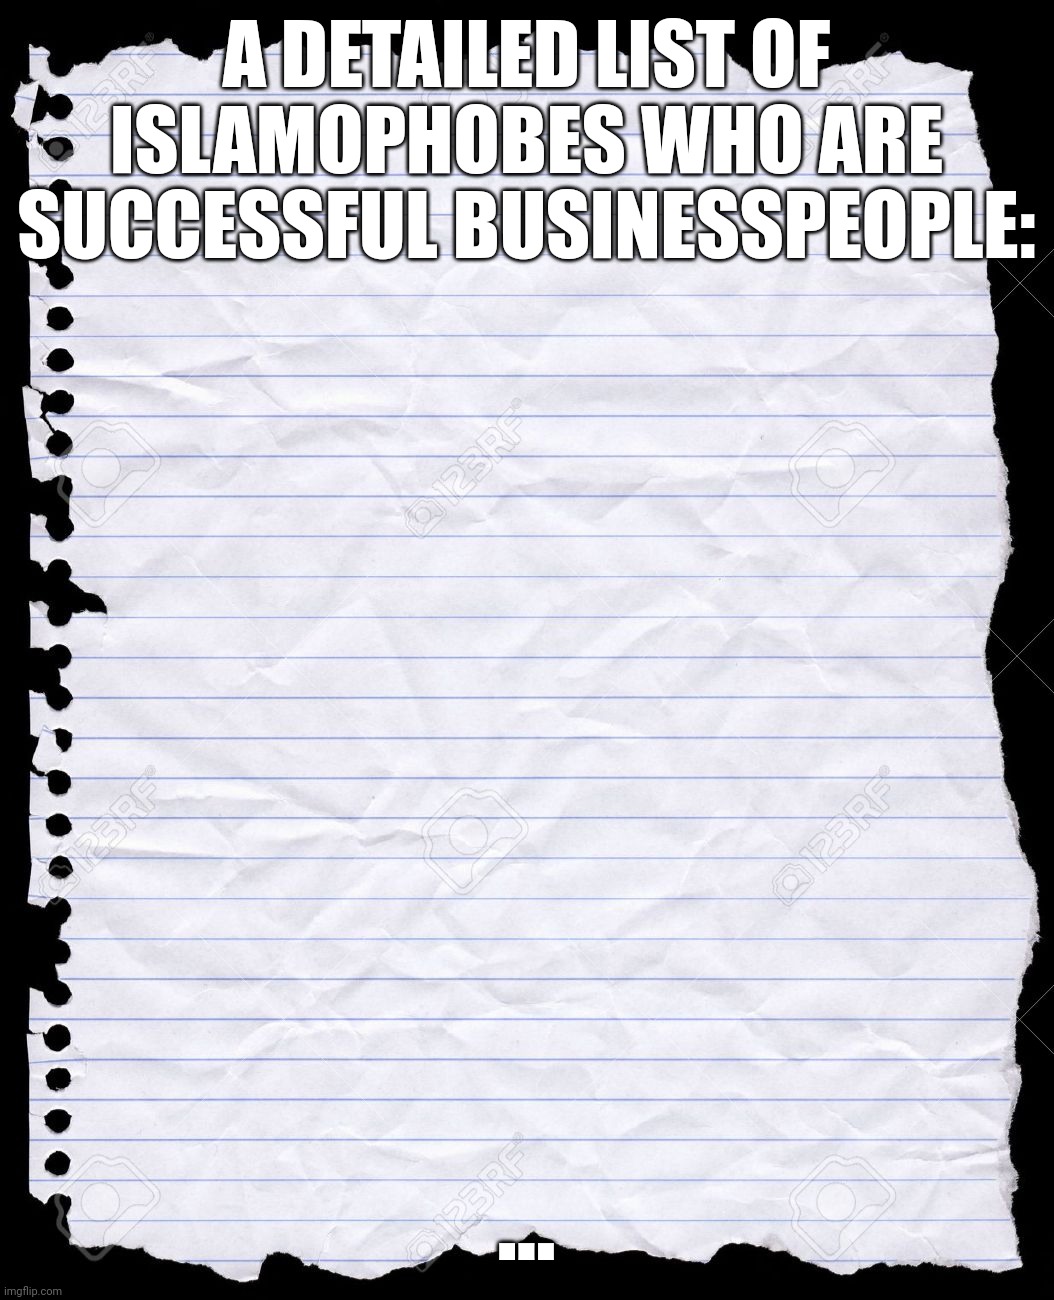 There's No Such Thing as "Successful Islamophobic Businessmen" | A DETAILED LIST OF ISLAMOPHOBES WHO ARE SUCCESSFUL BUSINESSPEOPLE:; ... | image tagged in blank paper,businessman,success,islamophobia | made w/ Imgflip meme maker